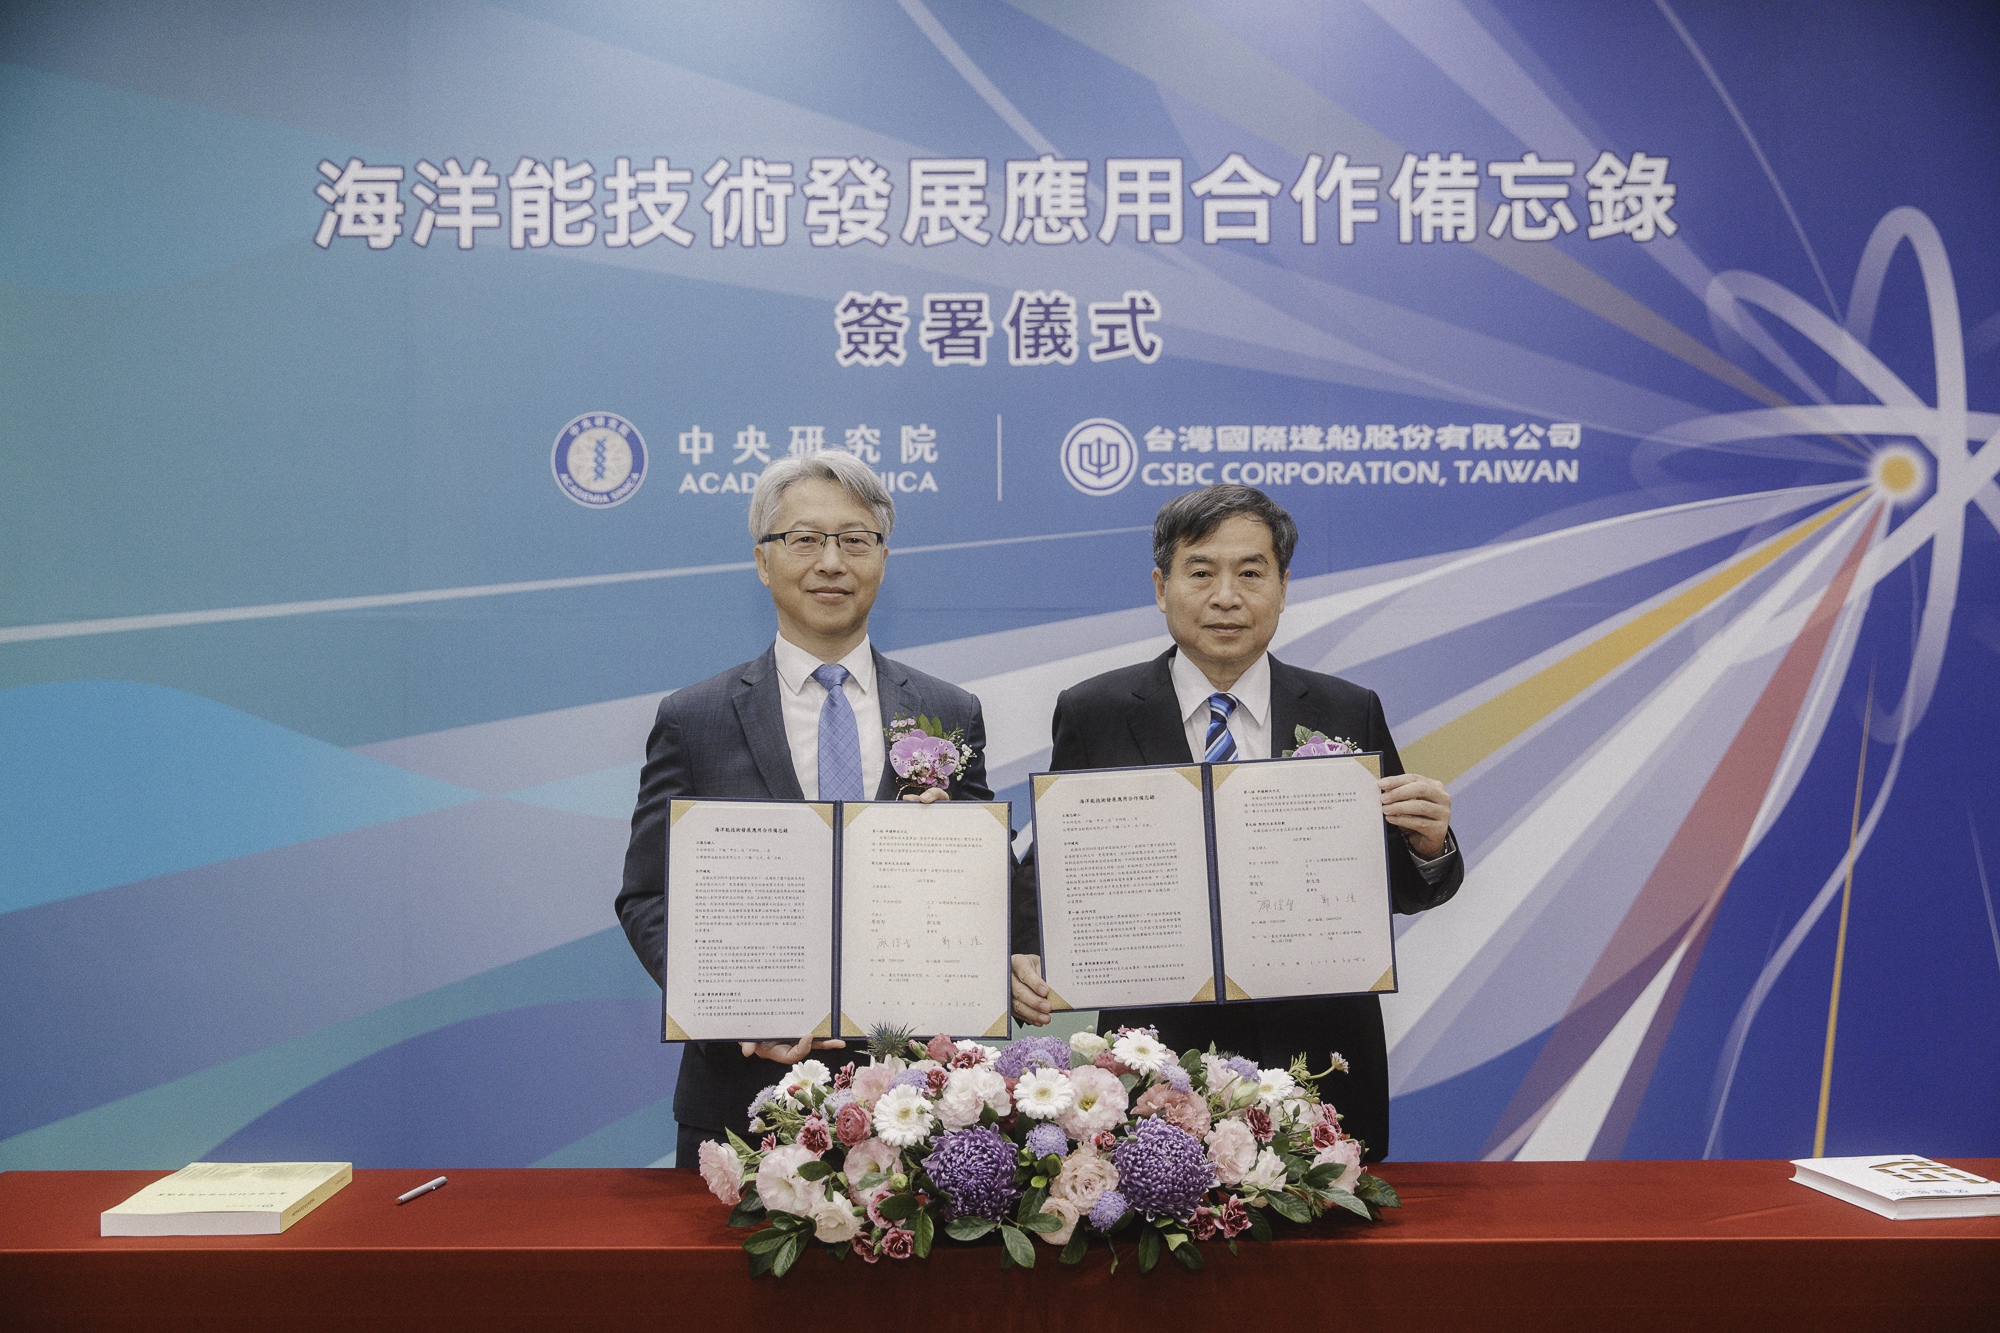 Net Zero Carbon Emissions by 2050 Academia Sinica and CSBC Corporation Taiwan Sign MOU on Marine Energy Technology and Deployment of Kuroshio Power Generation